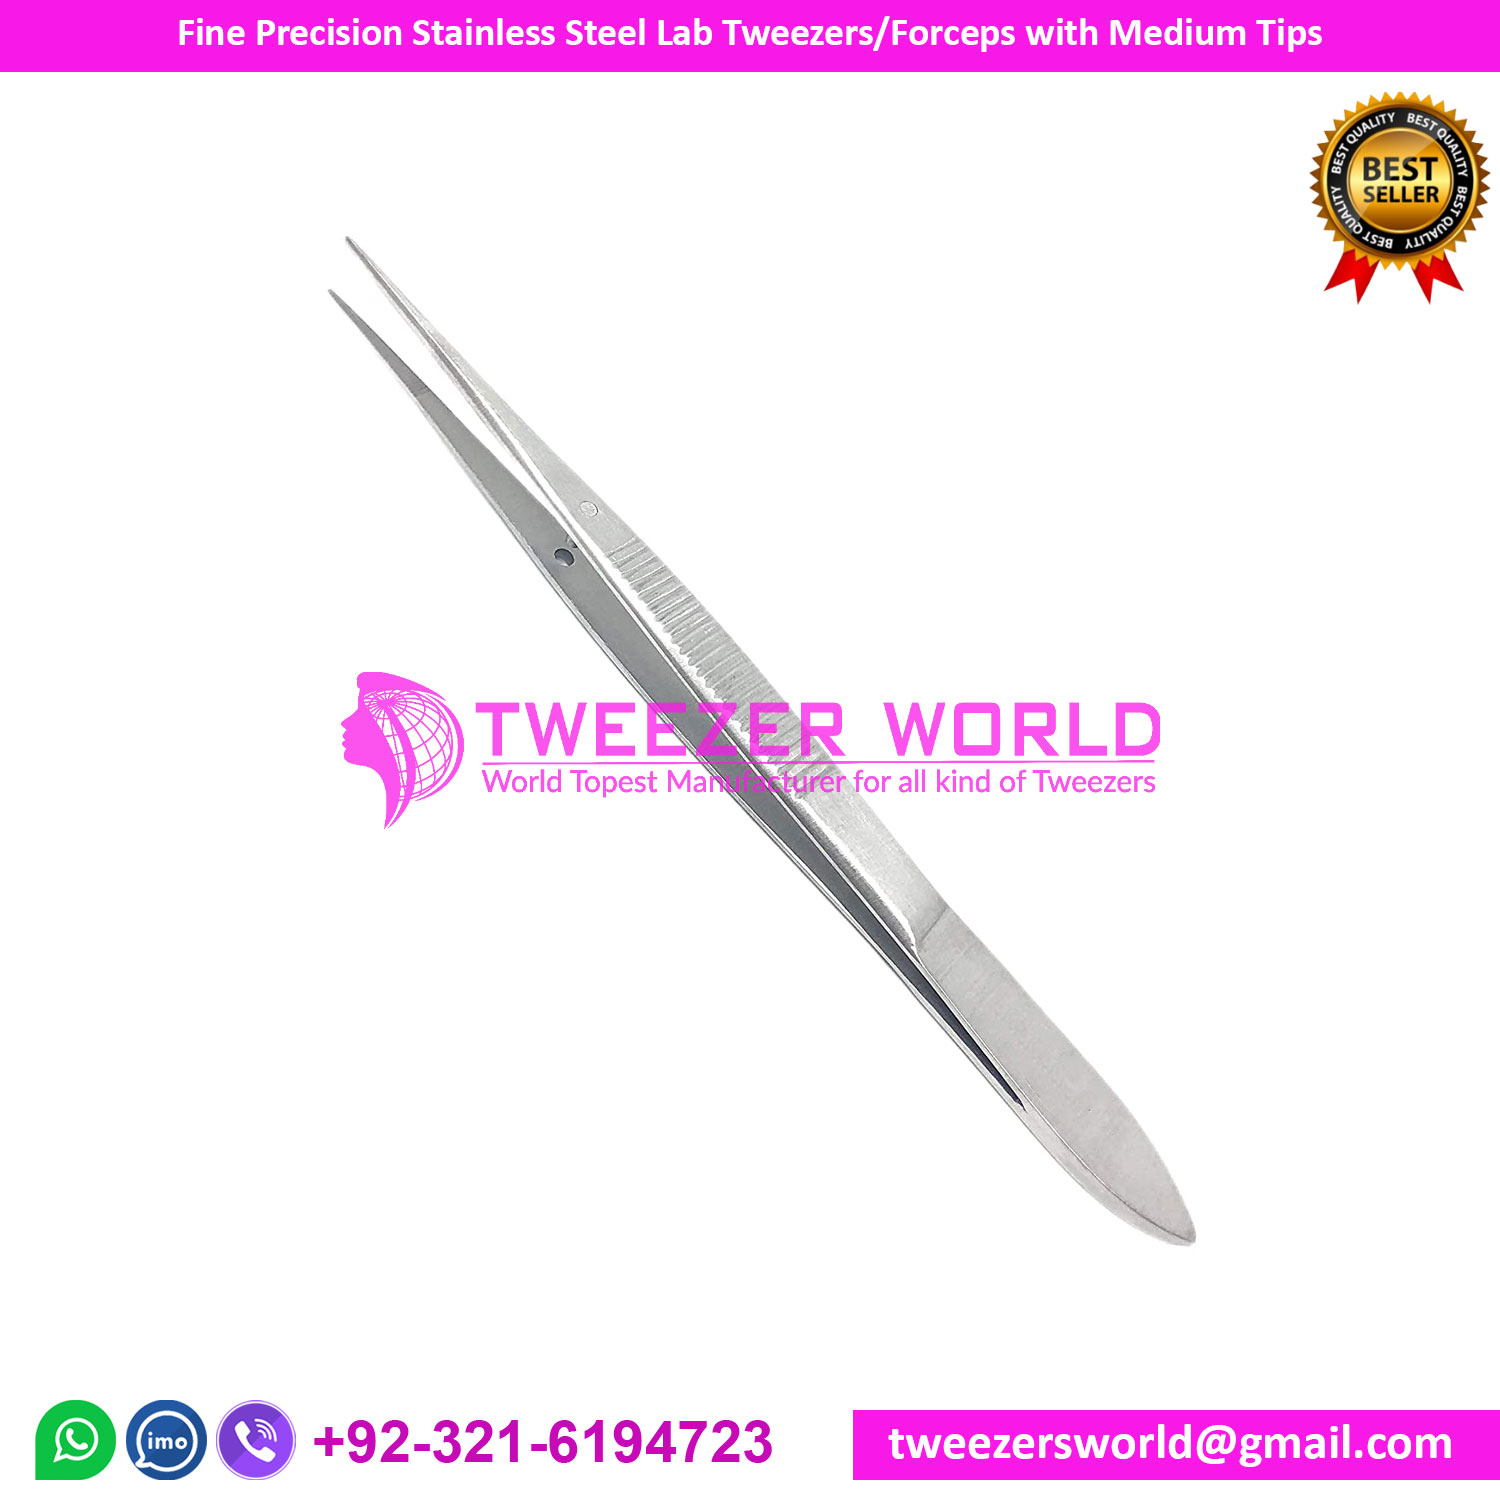 Fine Precision Stainless Steel Lab Watchmaker Tweezers Forceps With Medium Tips